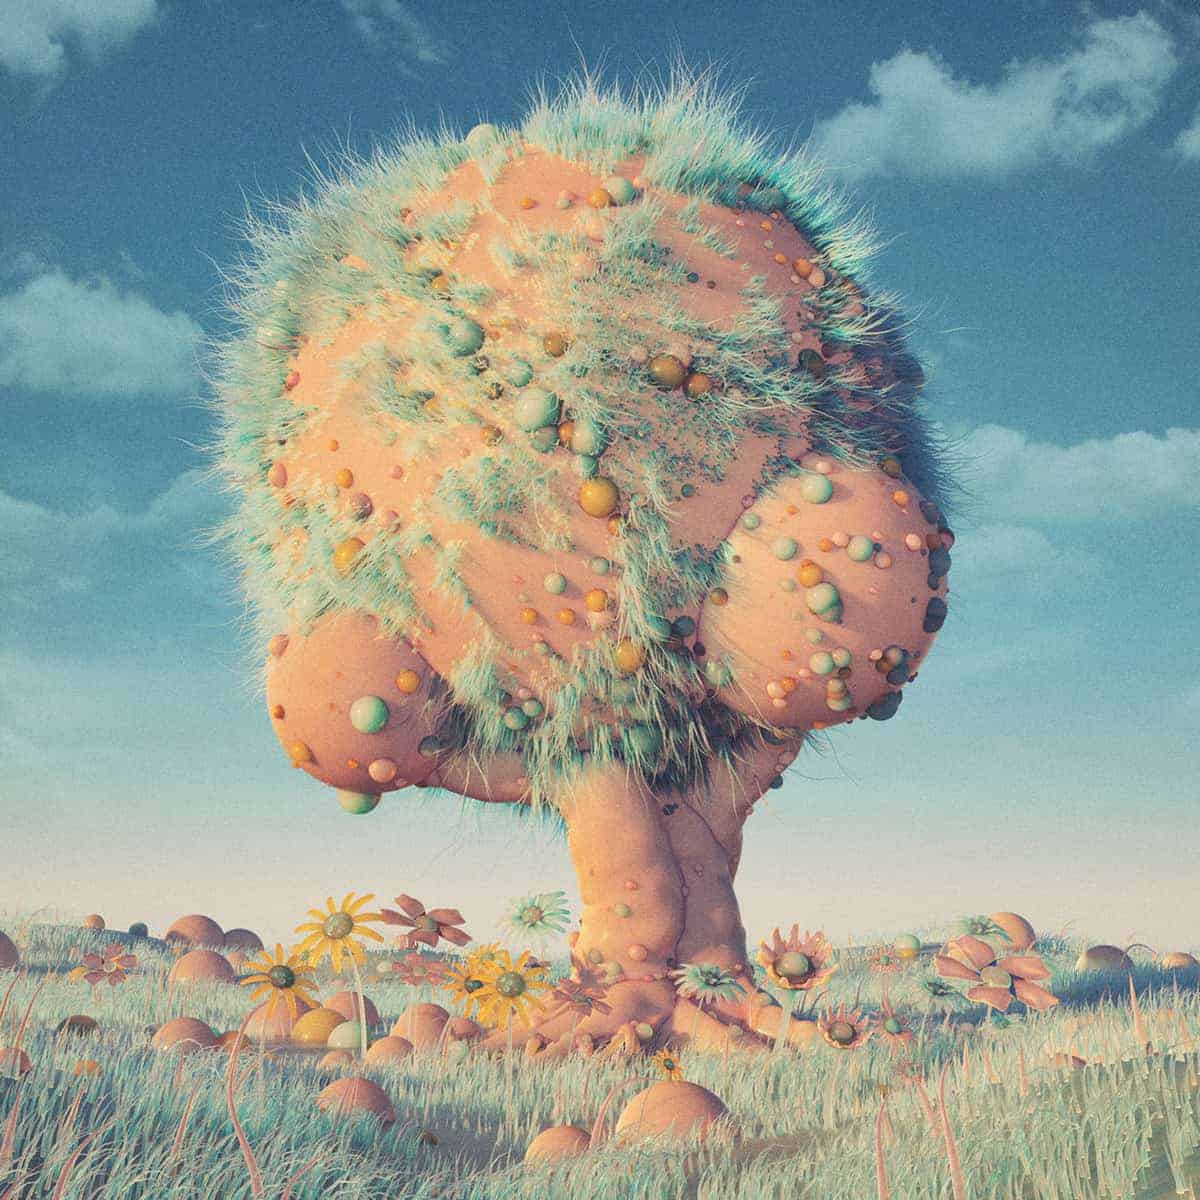 3D C4D | The Imaginative Futuristic and Surreal Worlds of Mike Winkelmann (Beeple)